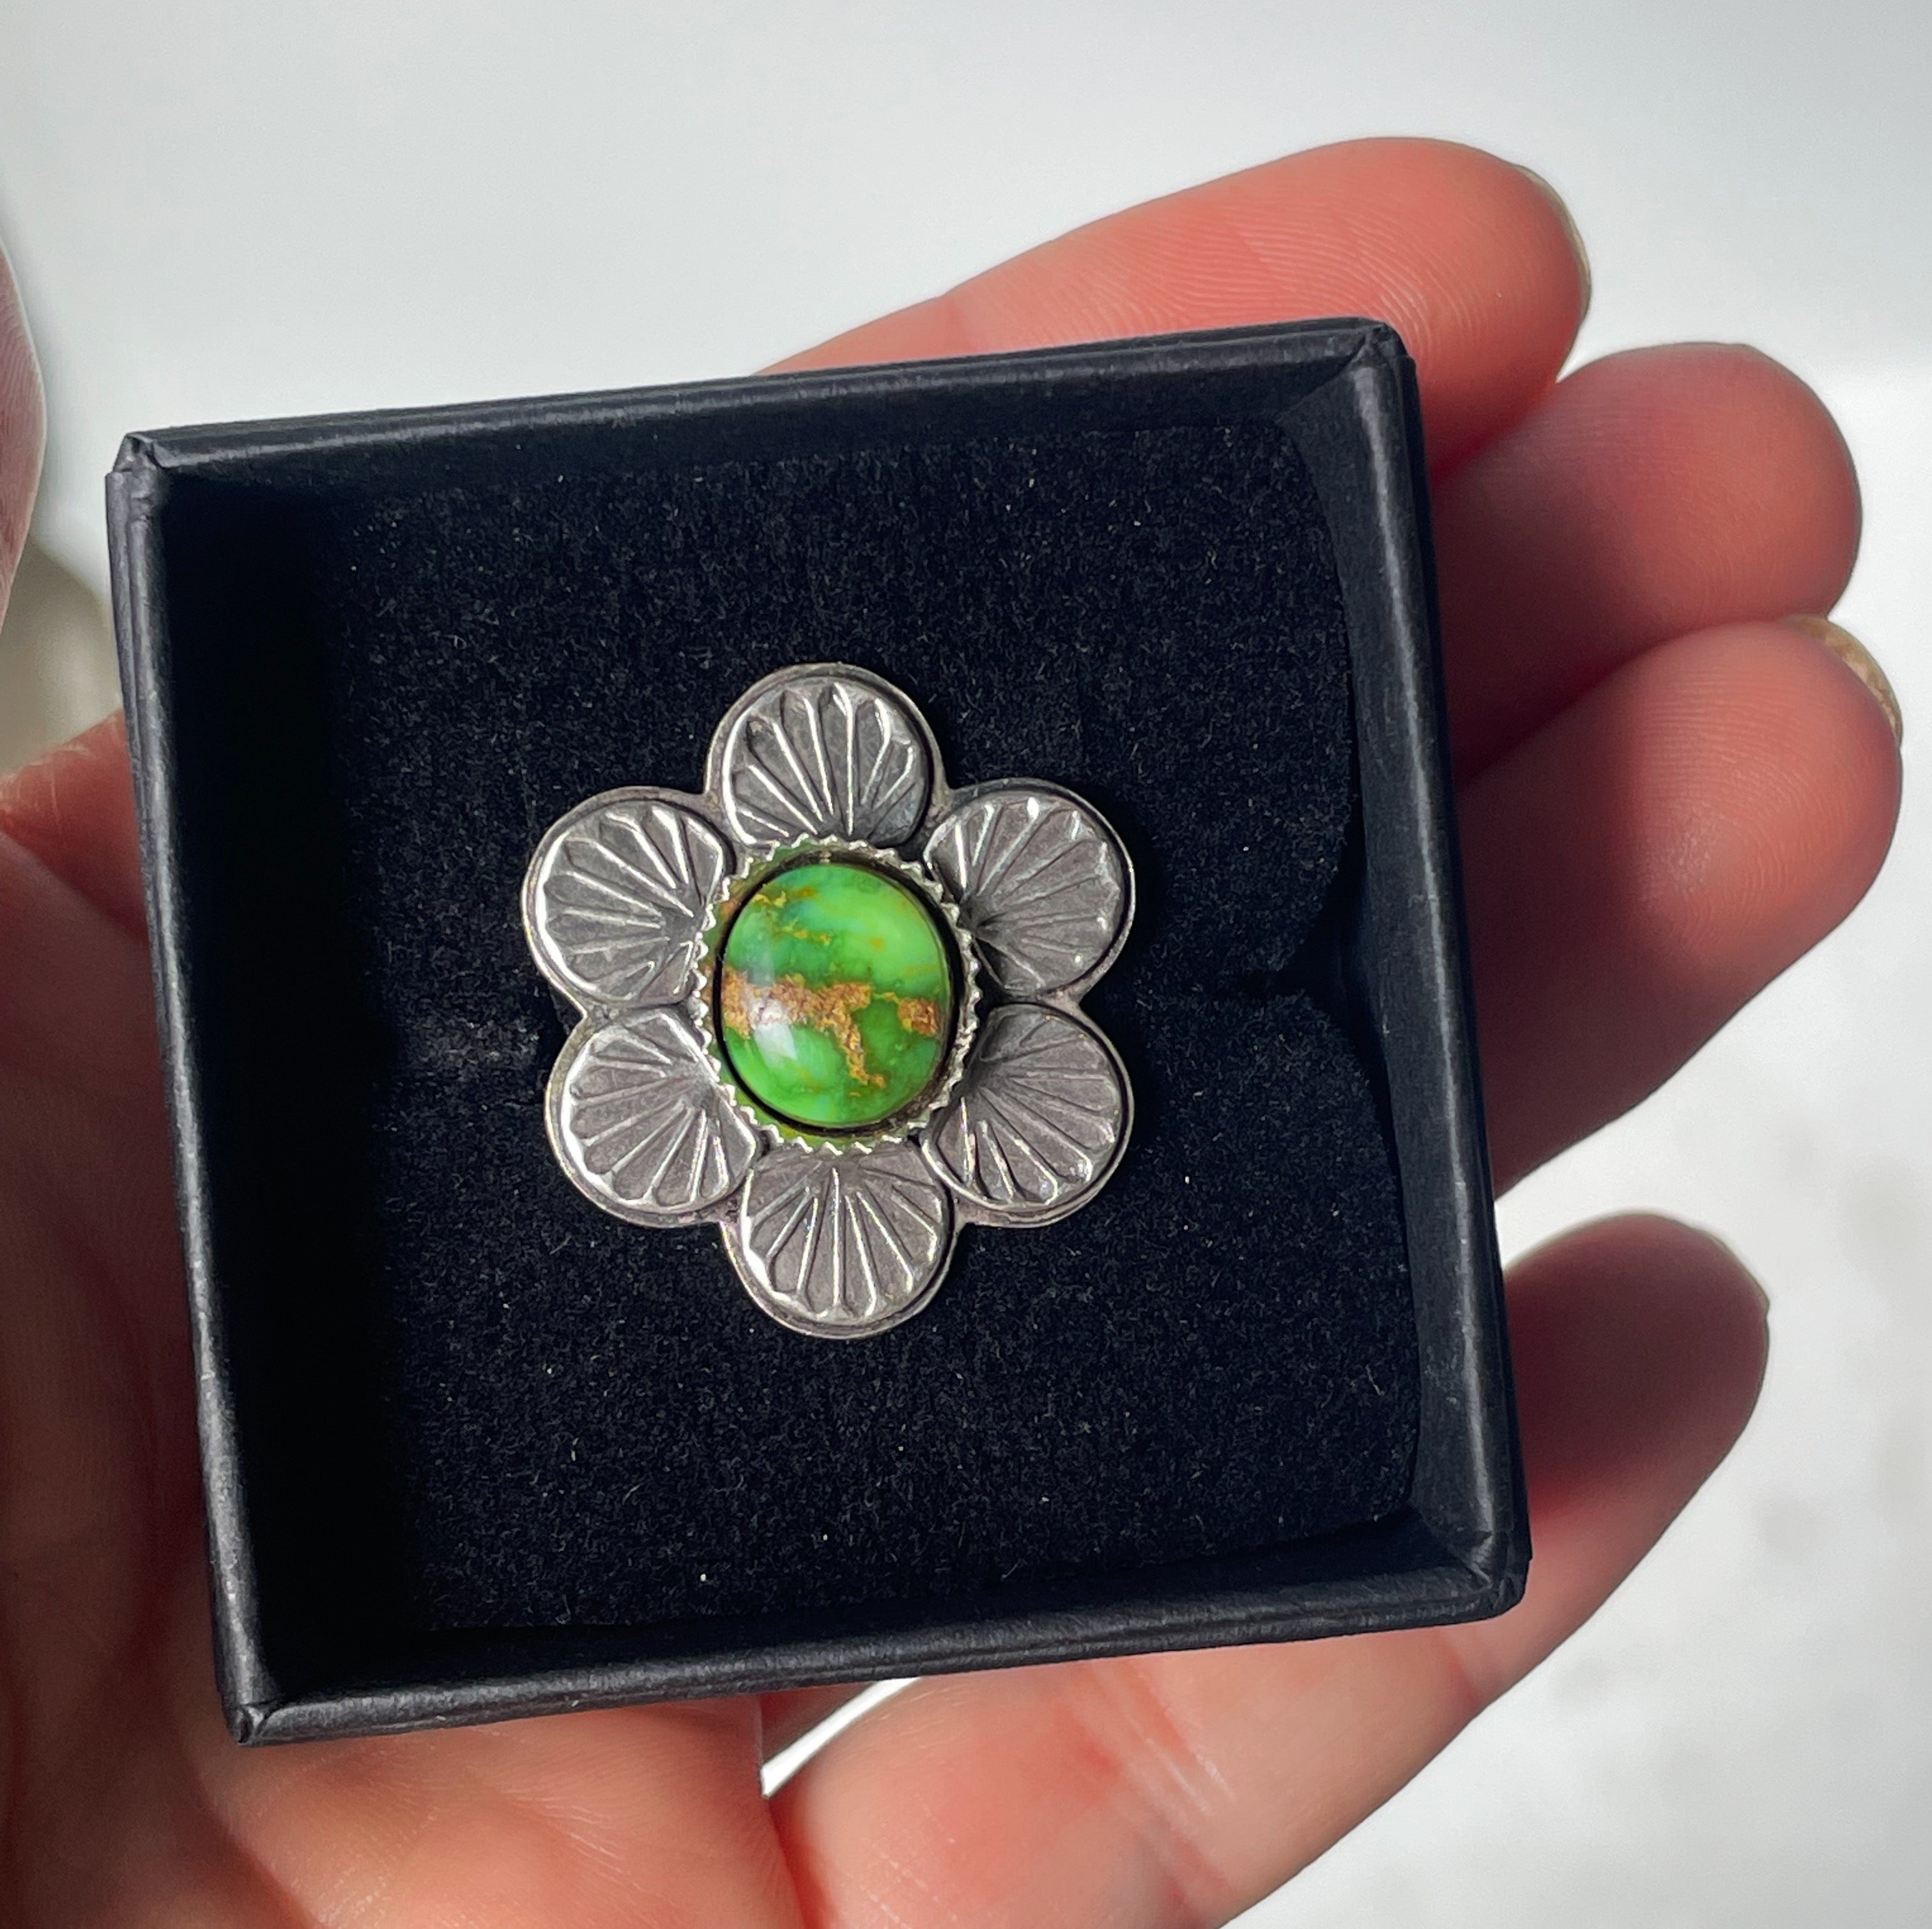 Sonoran Gold Daisy Ring #2 - Made to Order